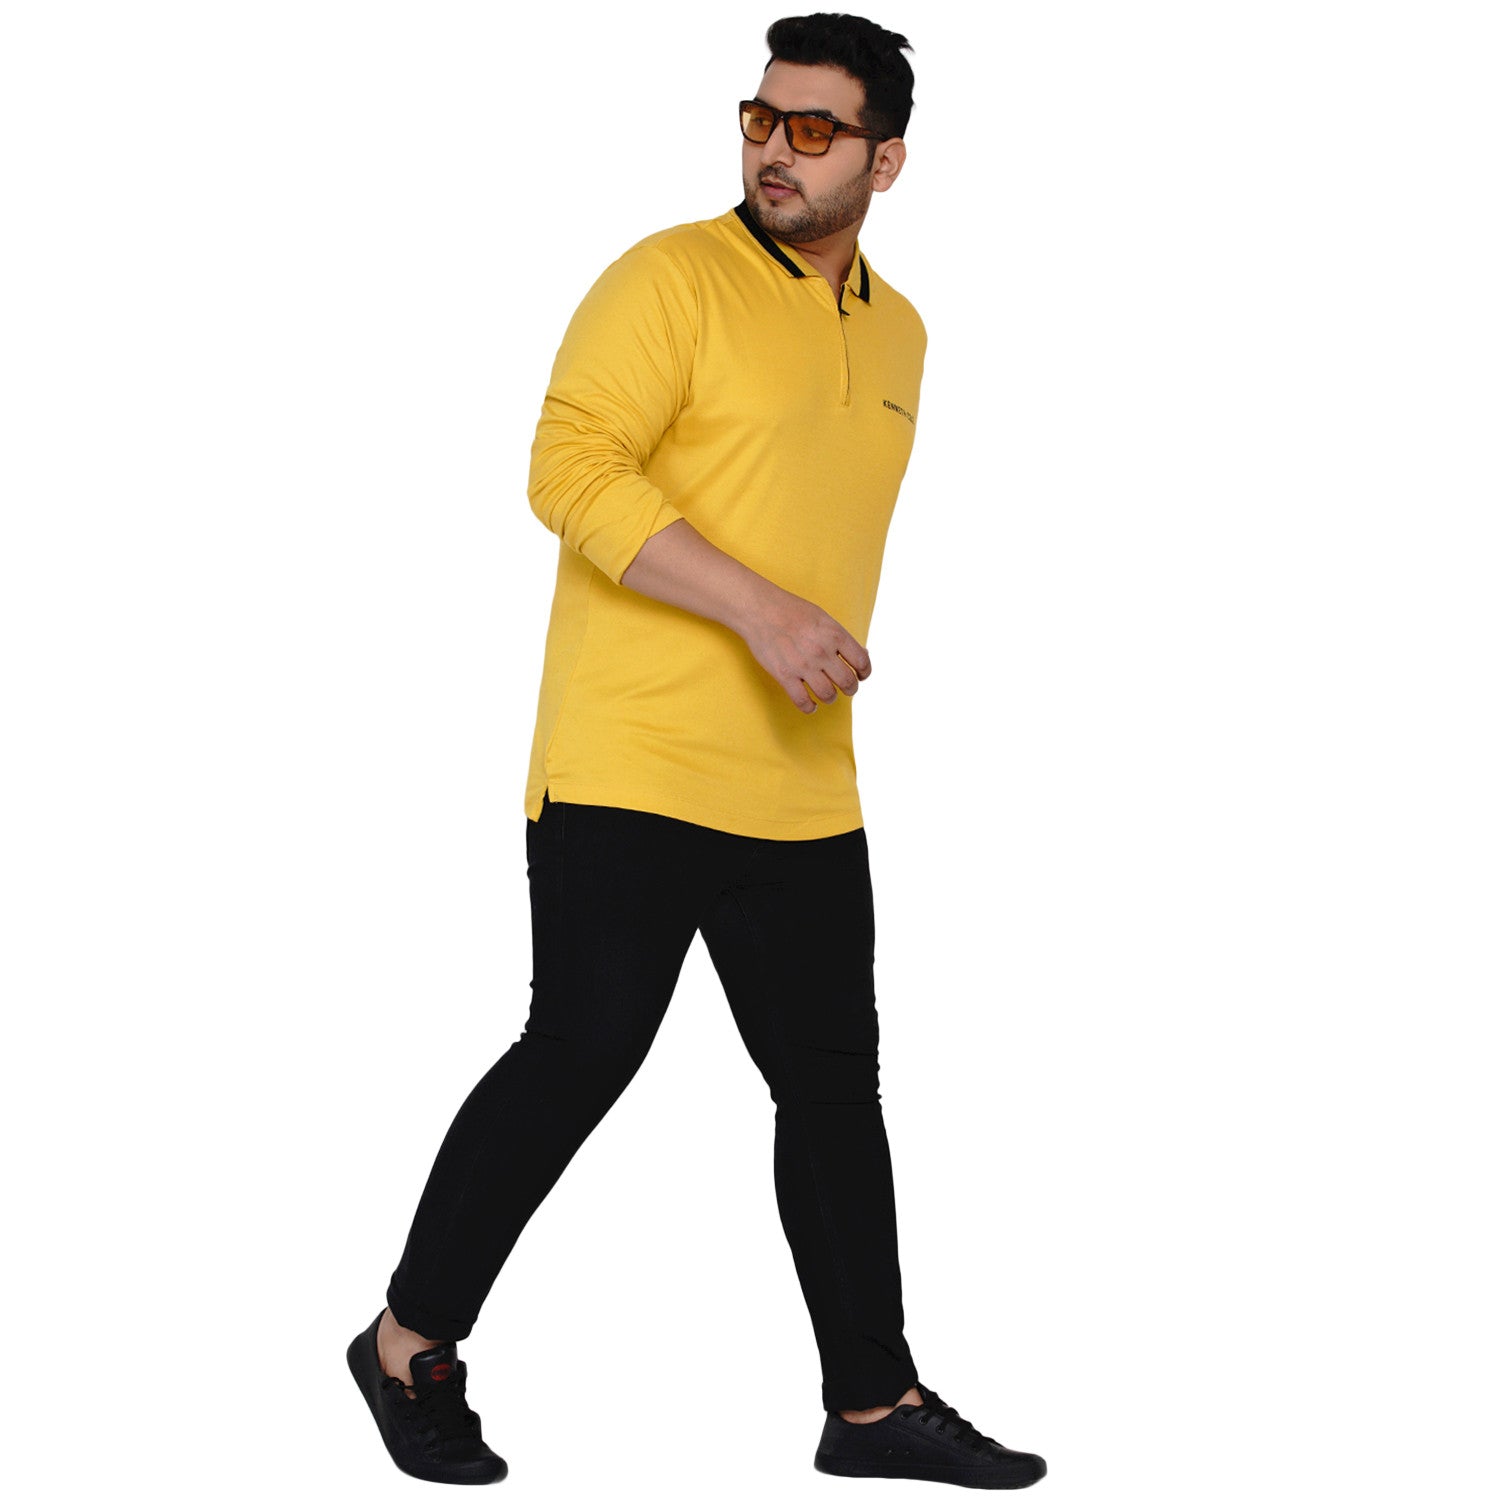 Plus Size Men's Clothing & Big Size Shoes for Men in India –